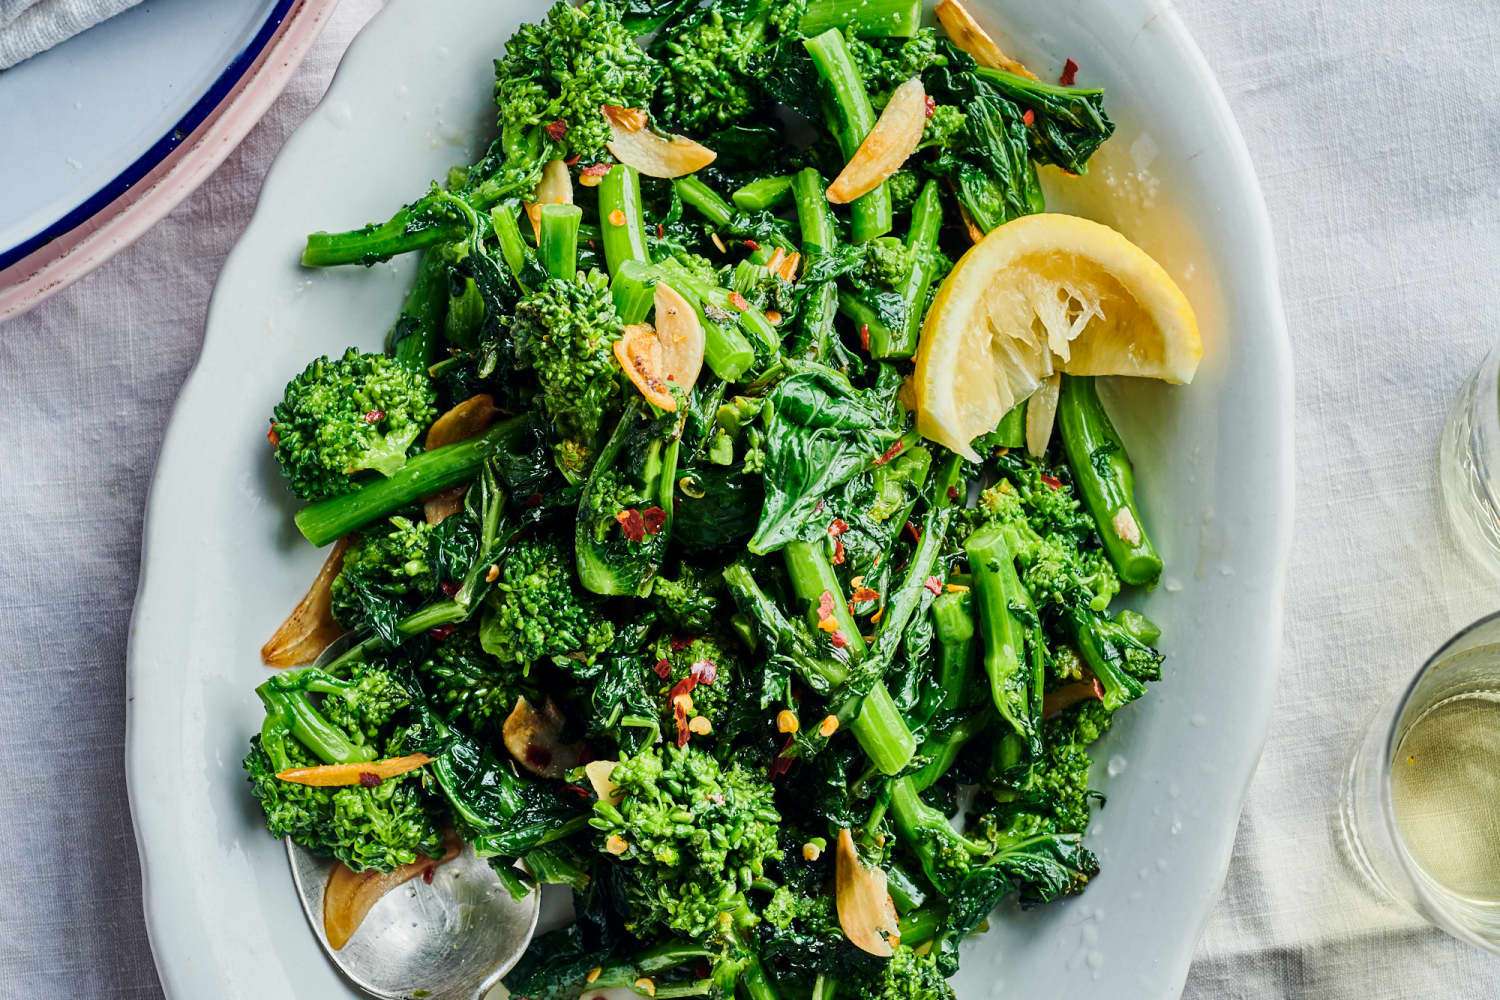 How To Cook Broccoli Rabe: The Very Best Method